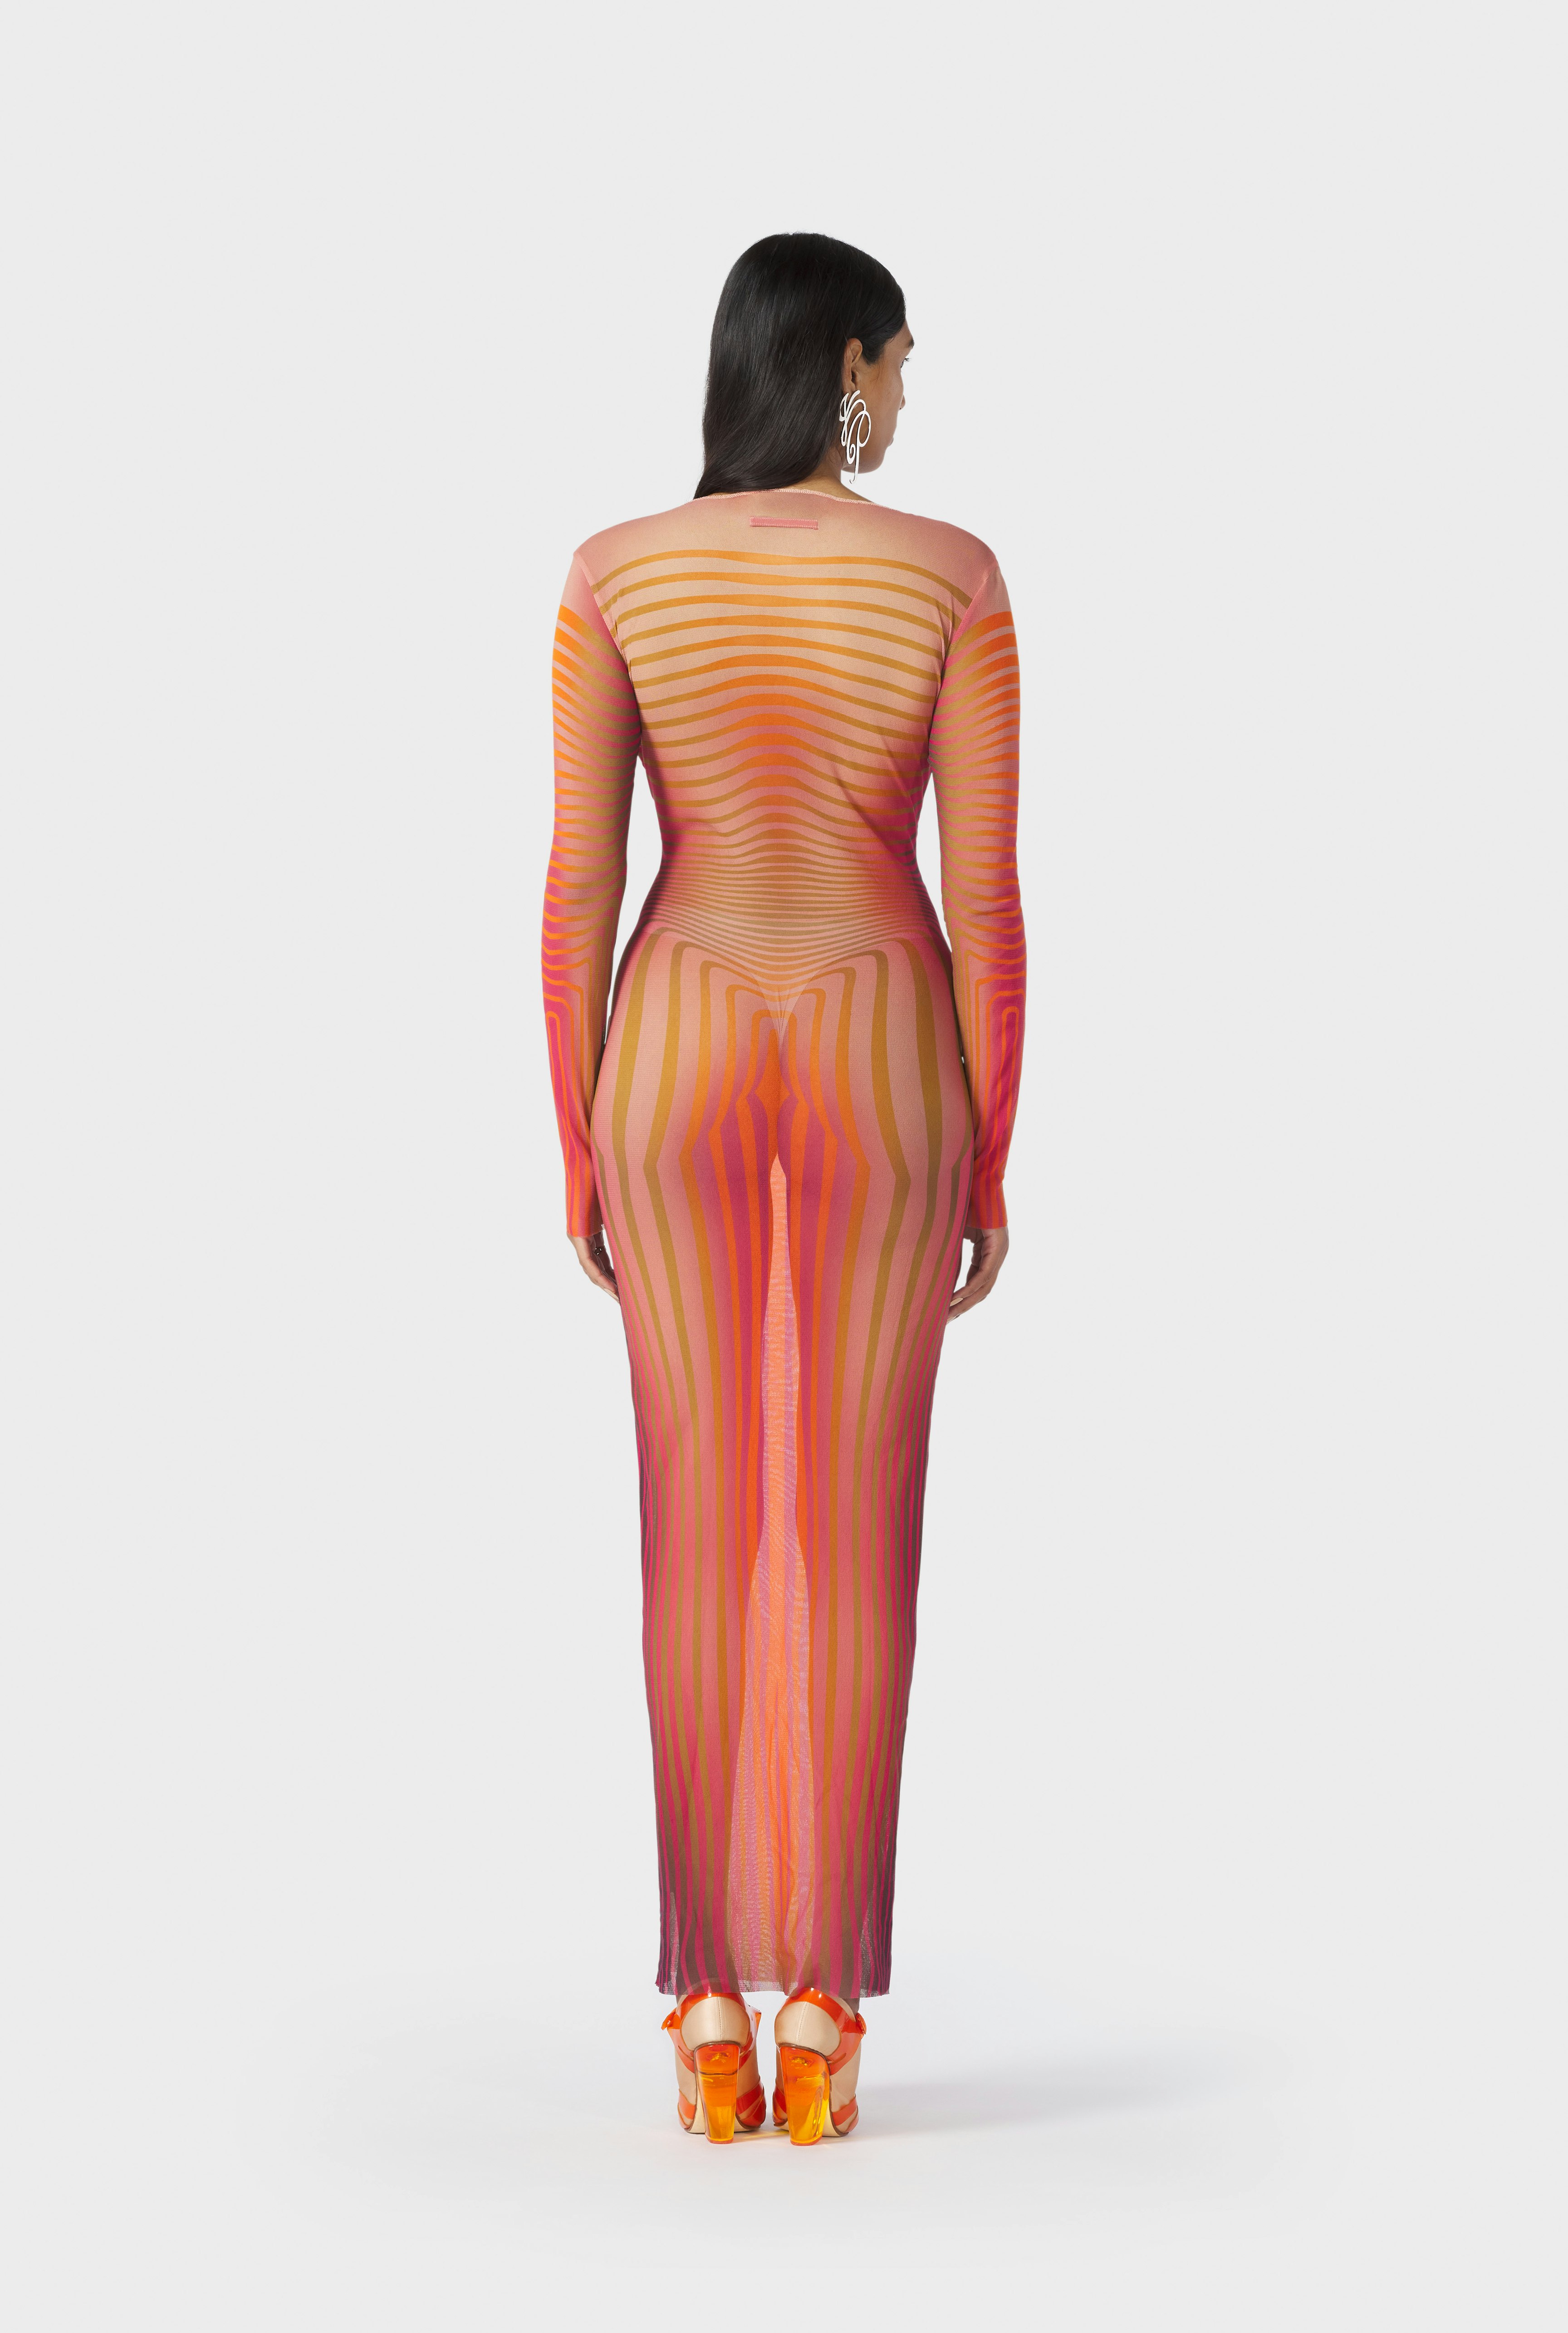 The Red Body Morphing Dress